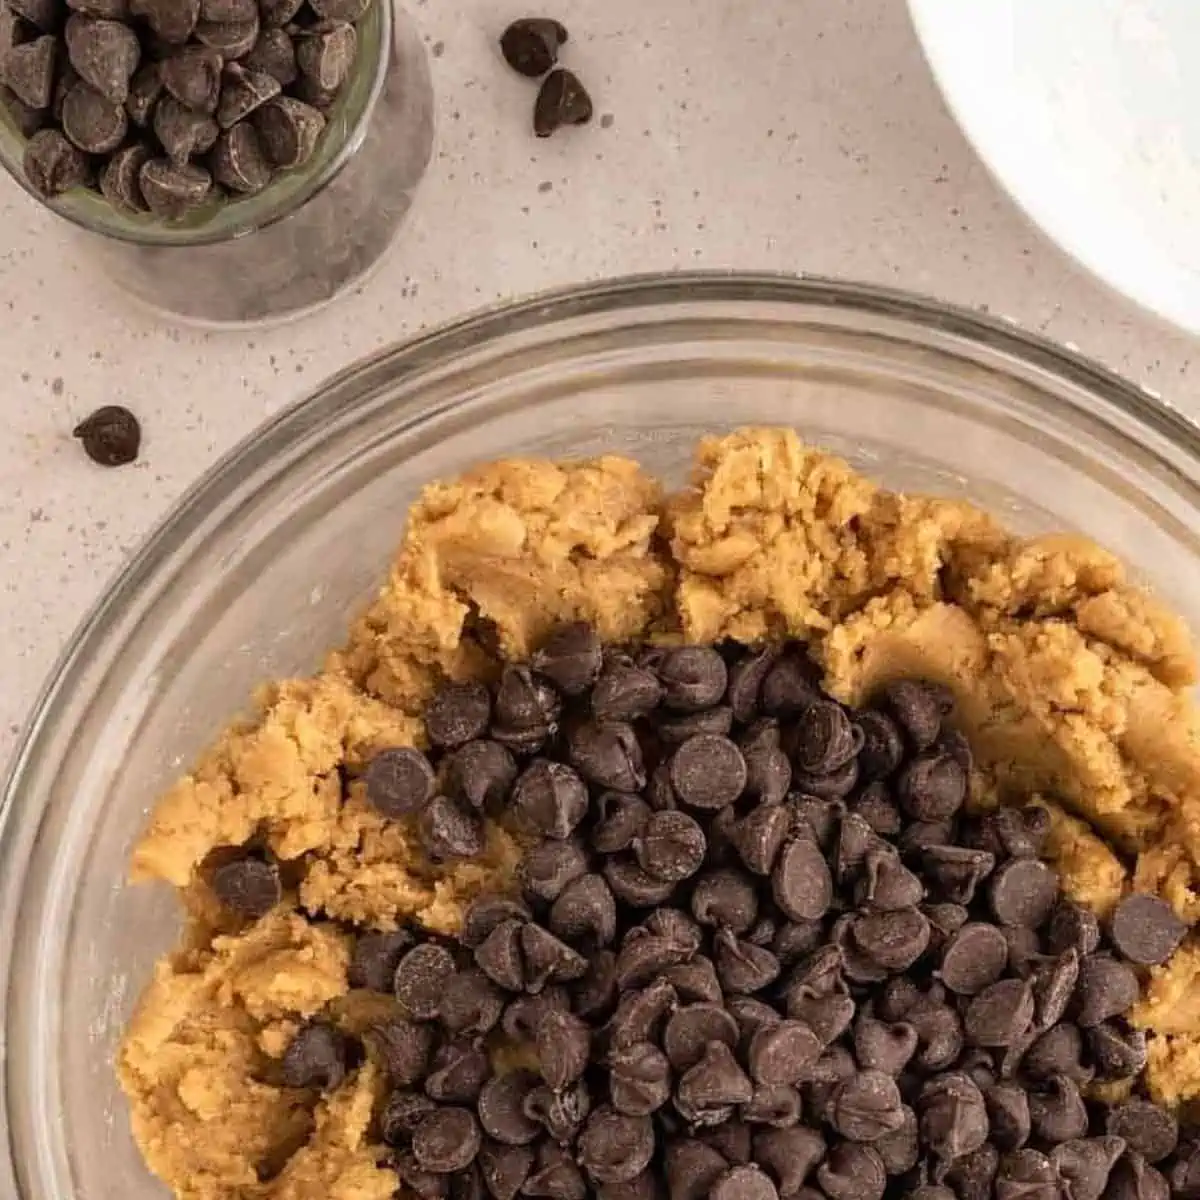 Pile of vegan chocolate chips on top of cookie dough.